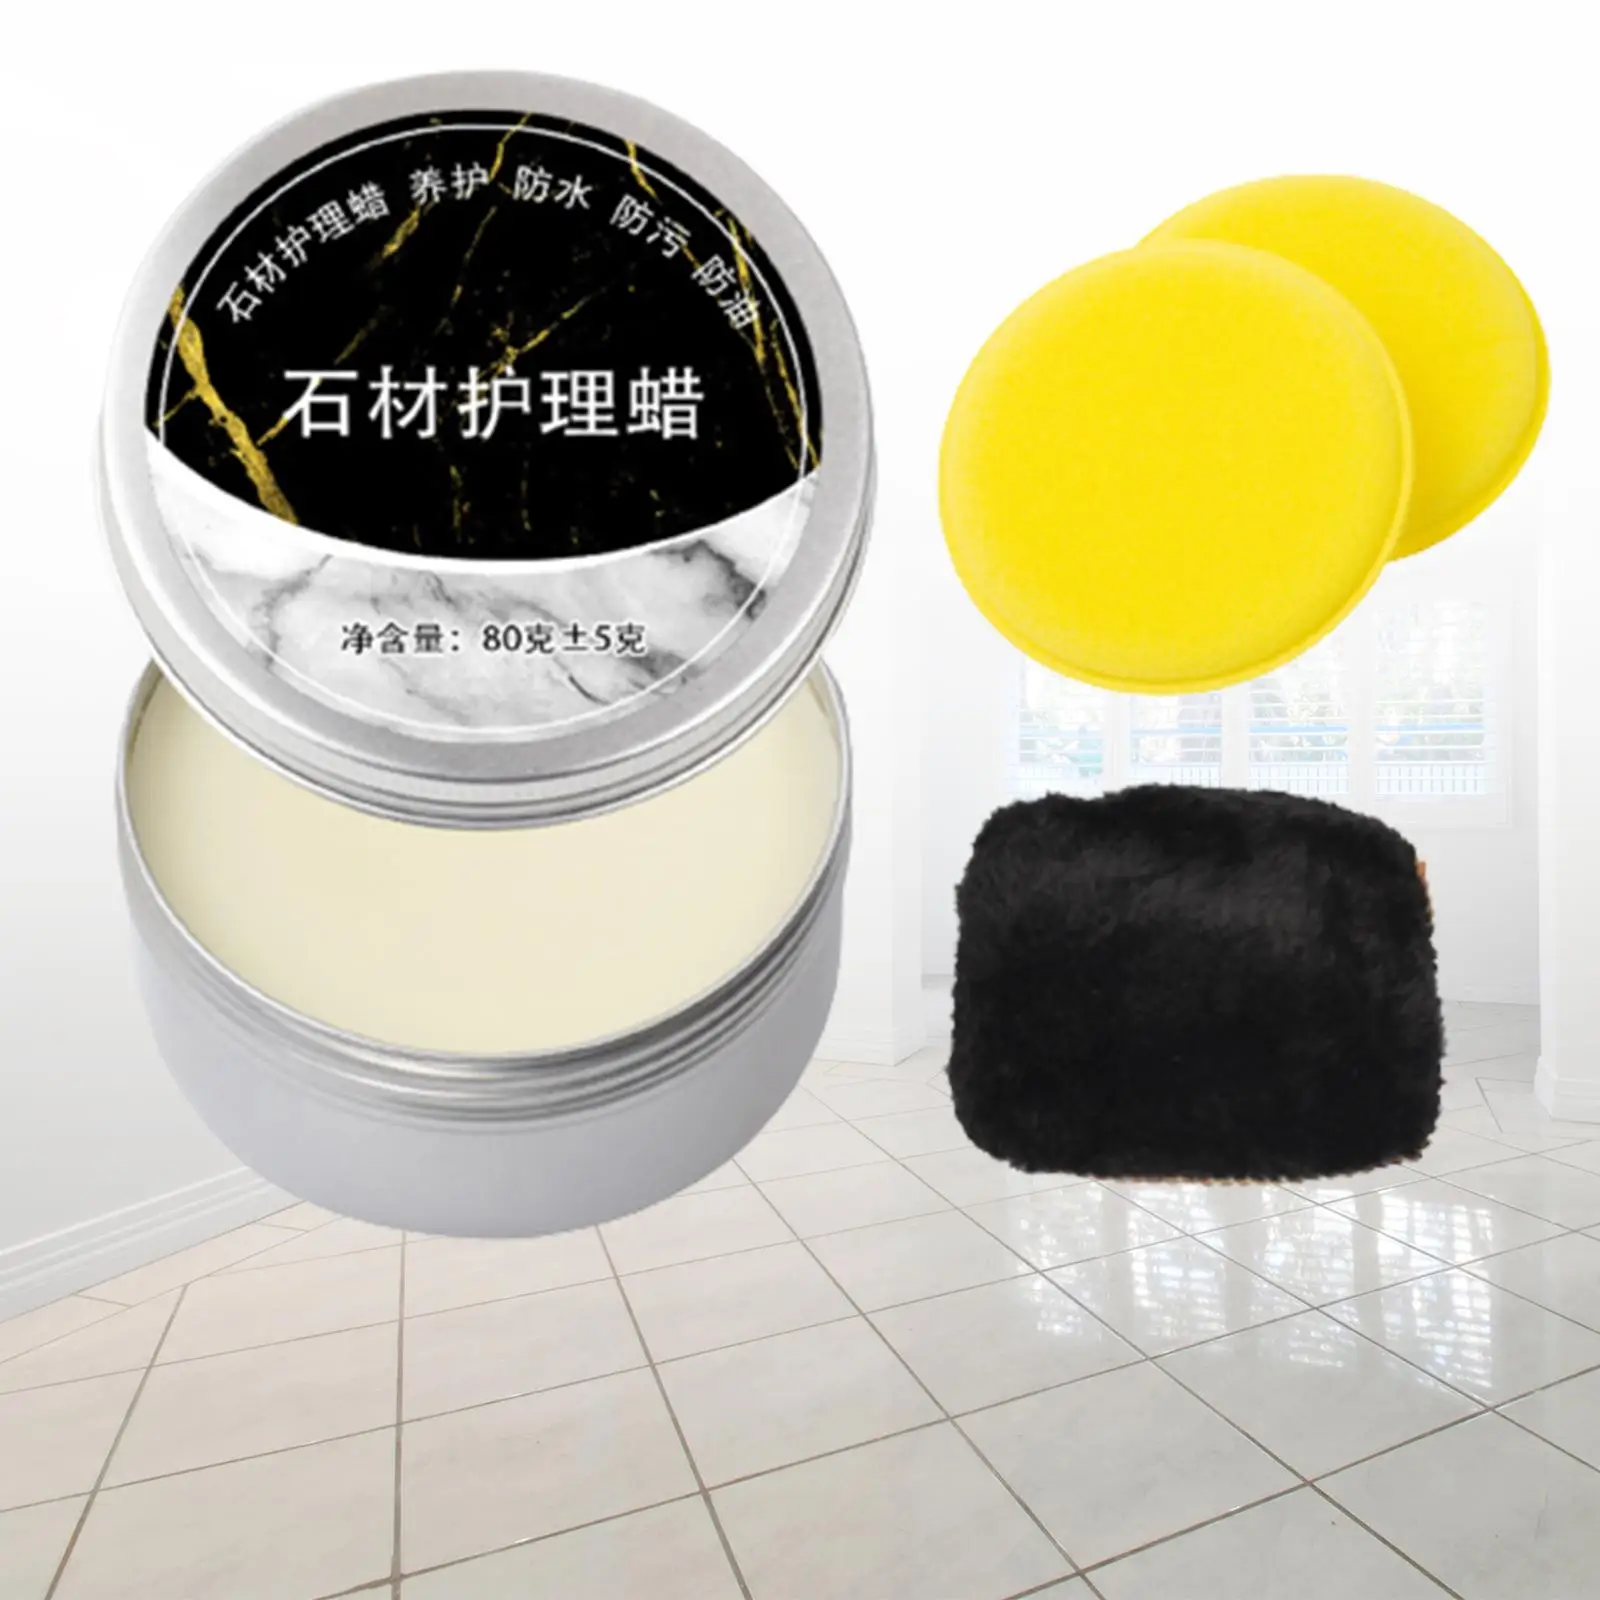 Wood Seasoning Beewax with Sponge Natural Beeswax Repair 80G Wood Furniture Beeswax Polish for Tables Marble Floors Cabinets